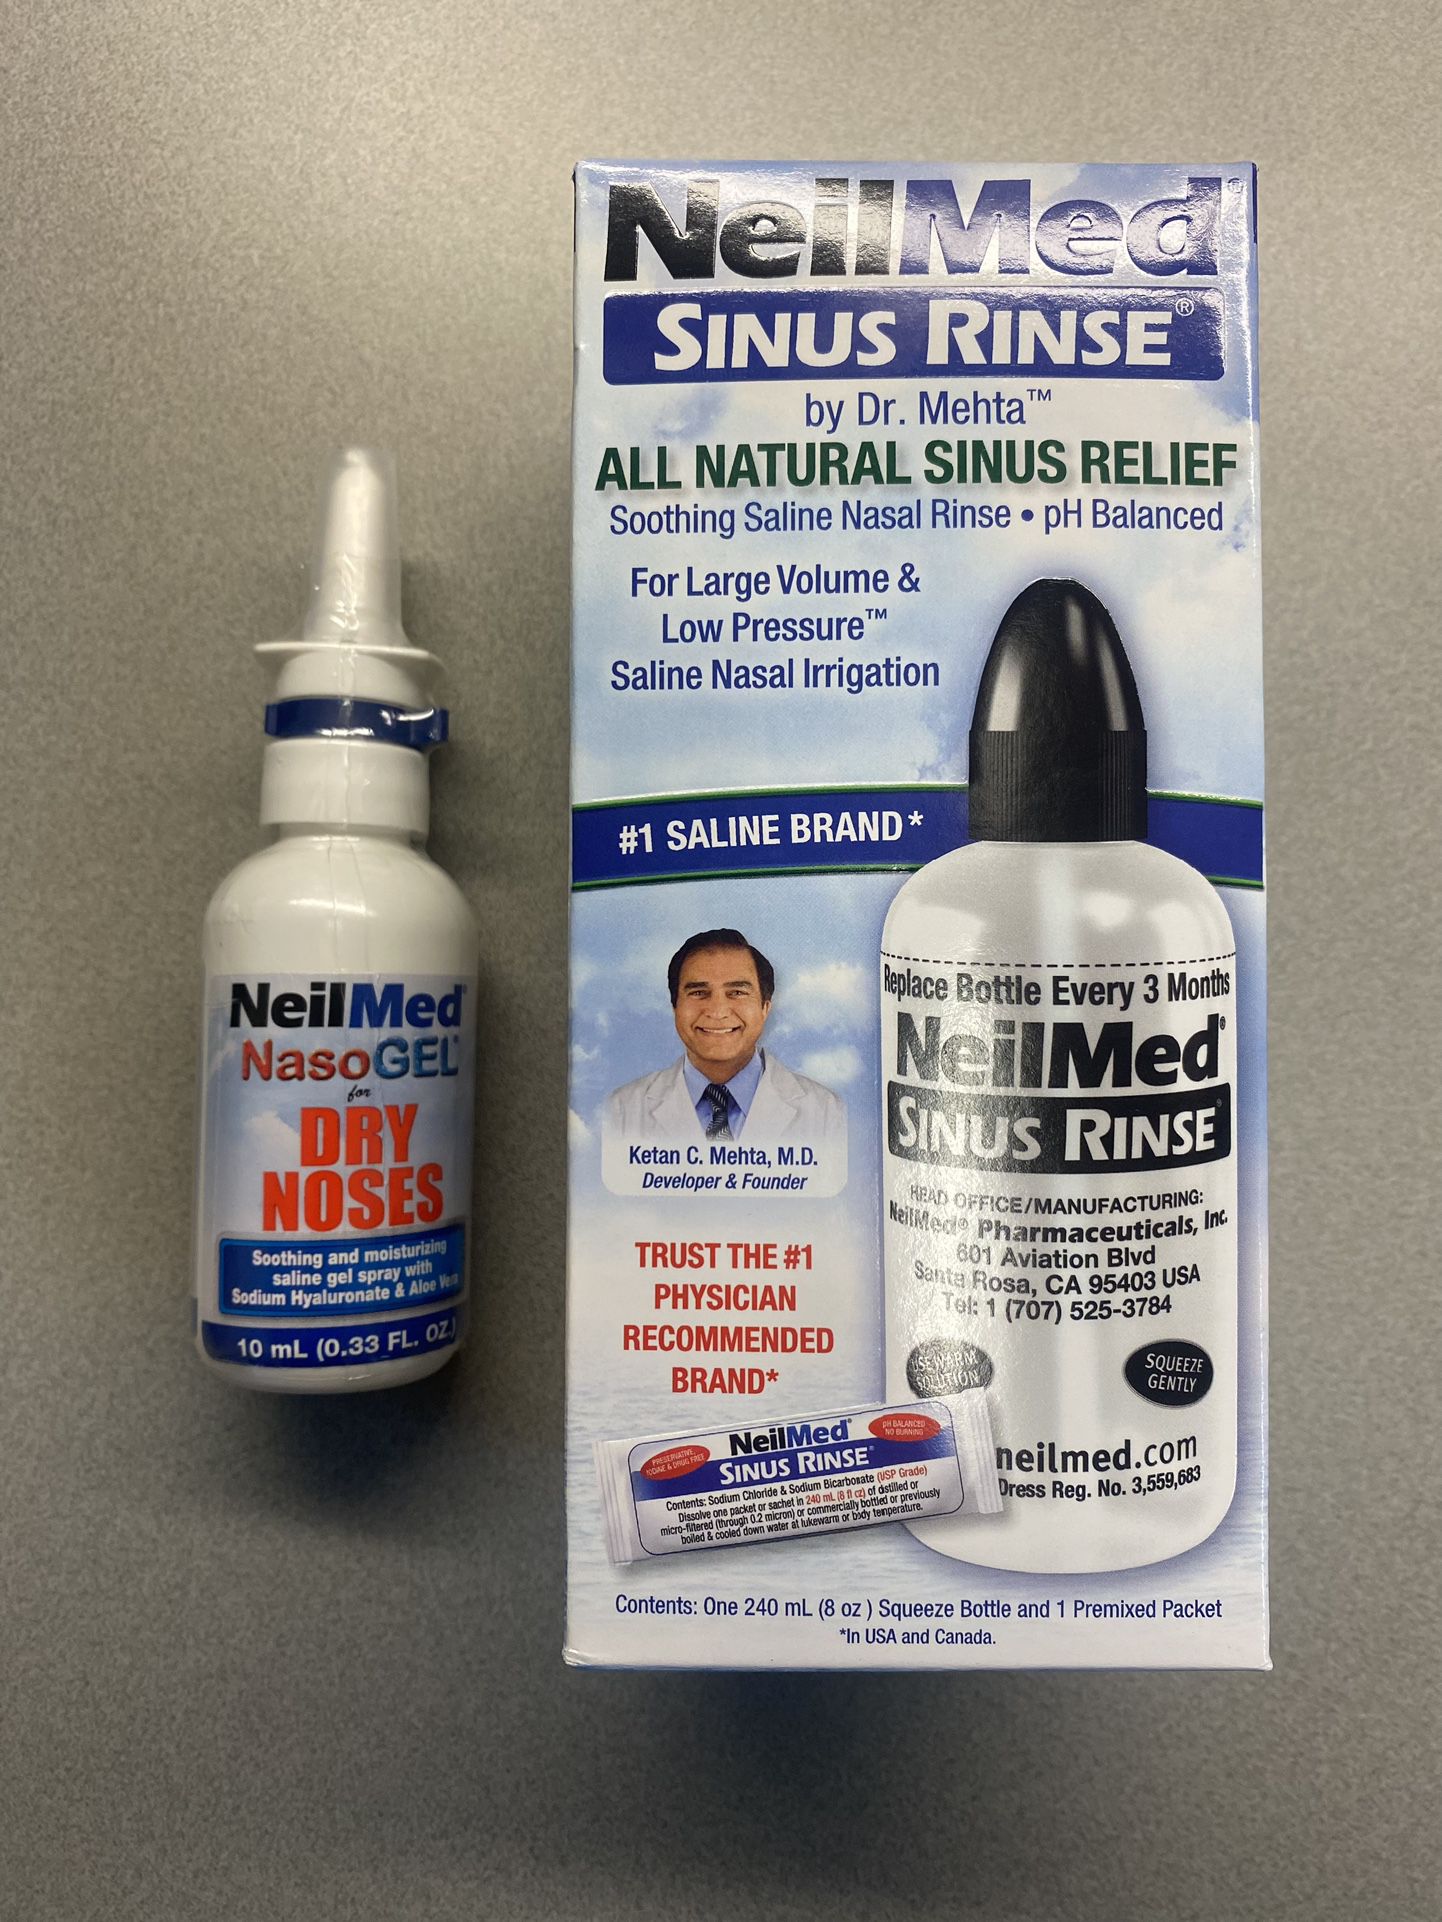 Neil Med Sinus Rinse And Dry Nose Spray Both Brand New And Sealed Both For Only $12!!!